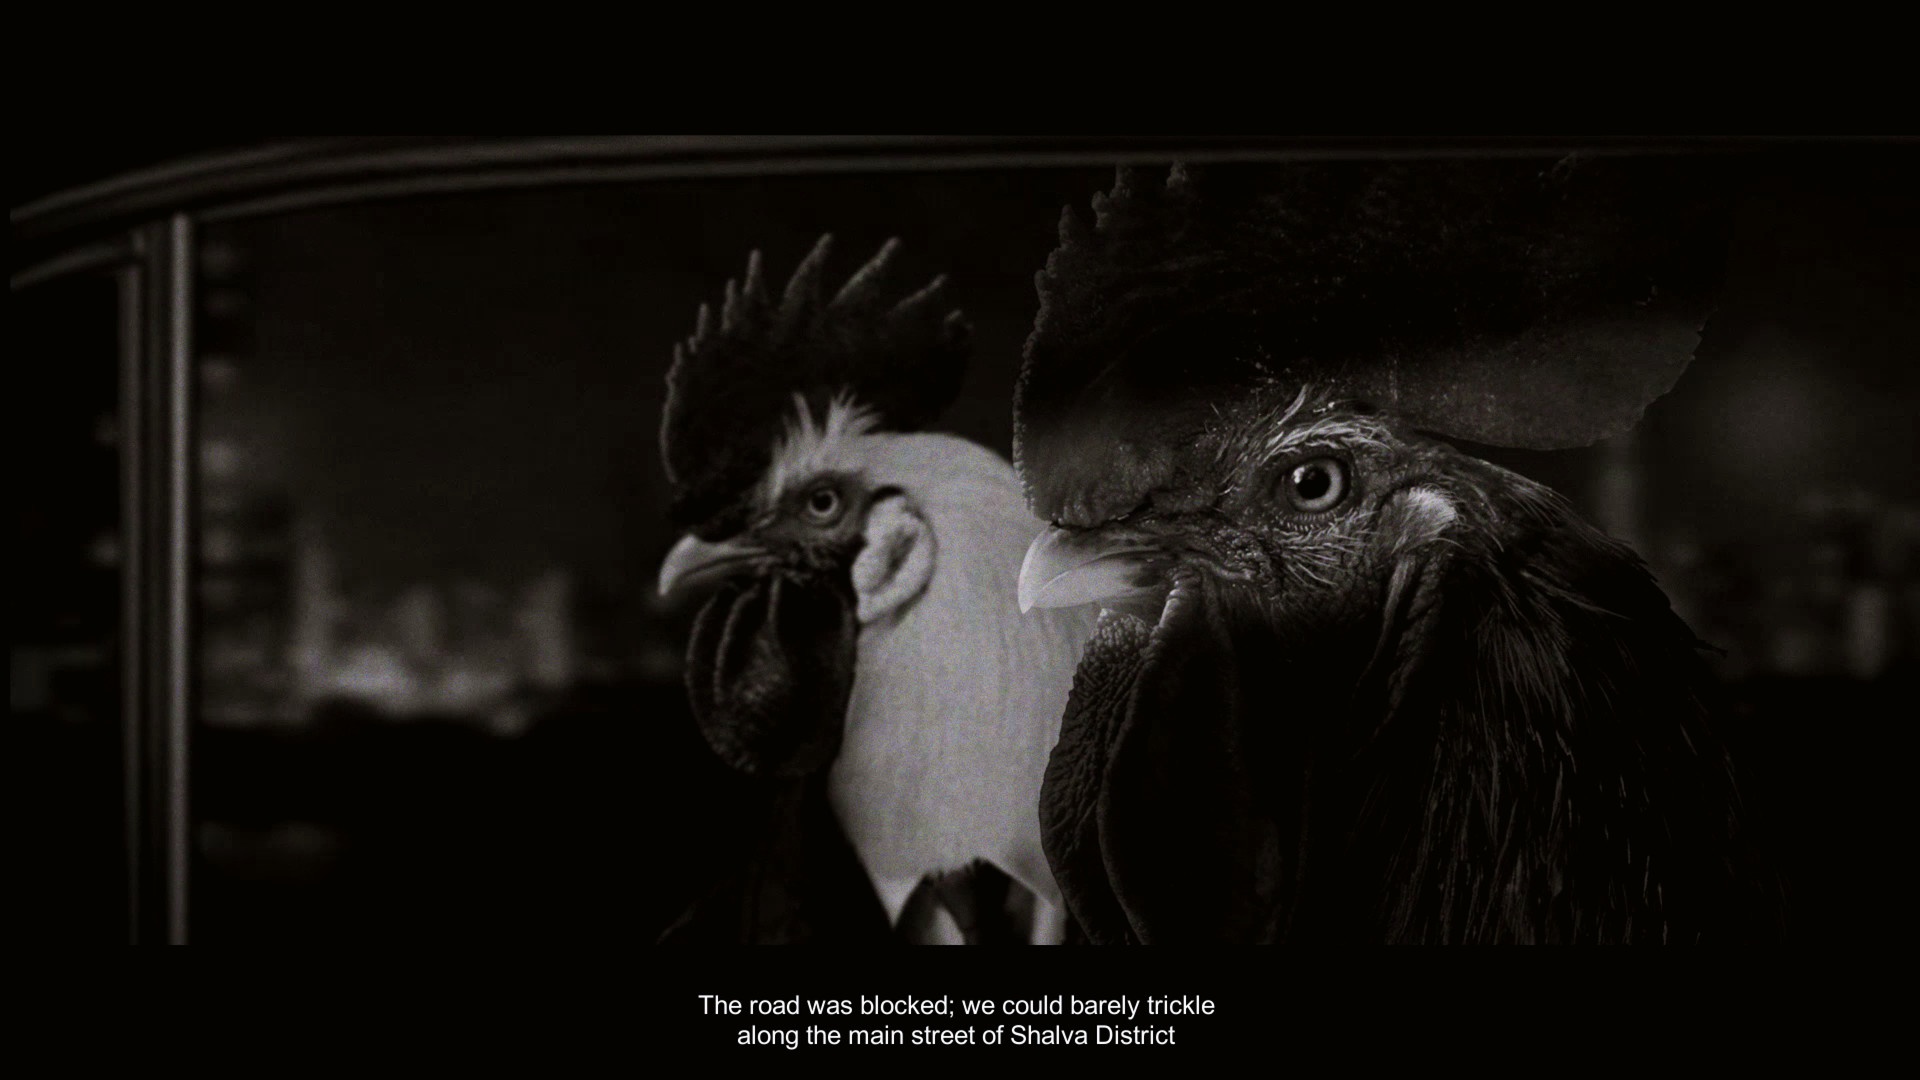 (Chicken Police is bursting with film noir allusions. For example, protagonist Sunny also shares his thoughts with us off-screen.)